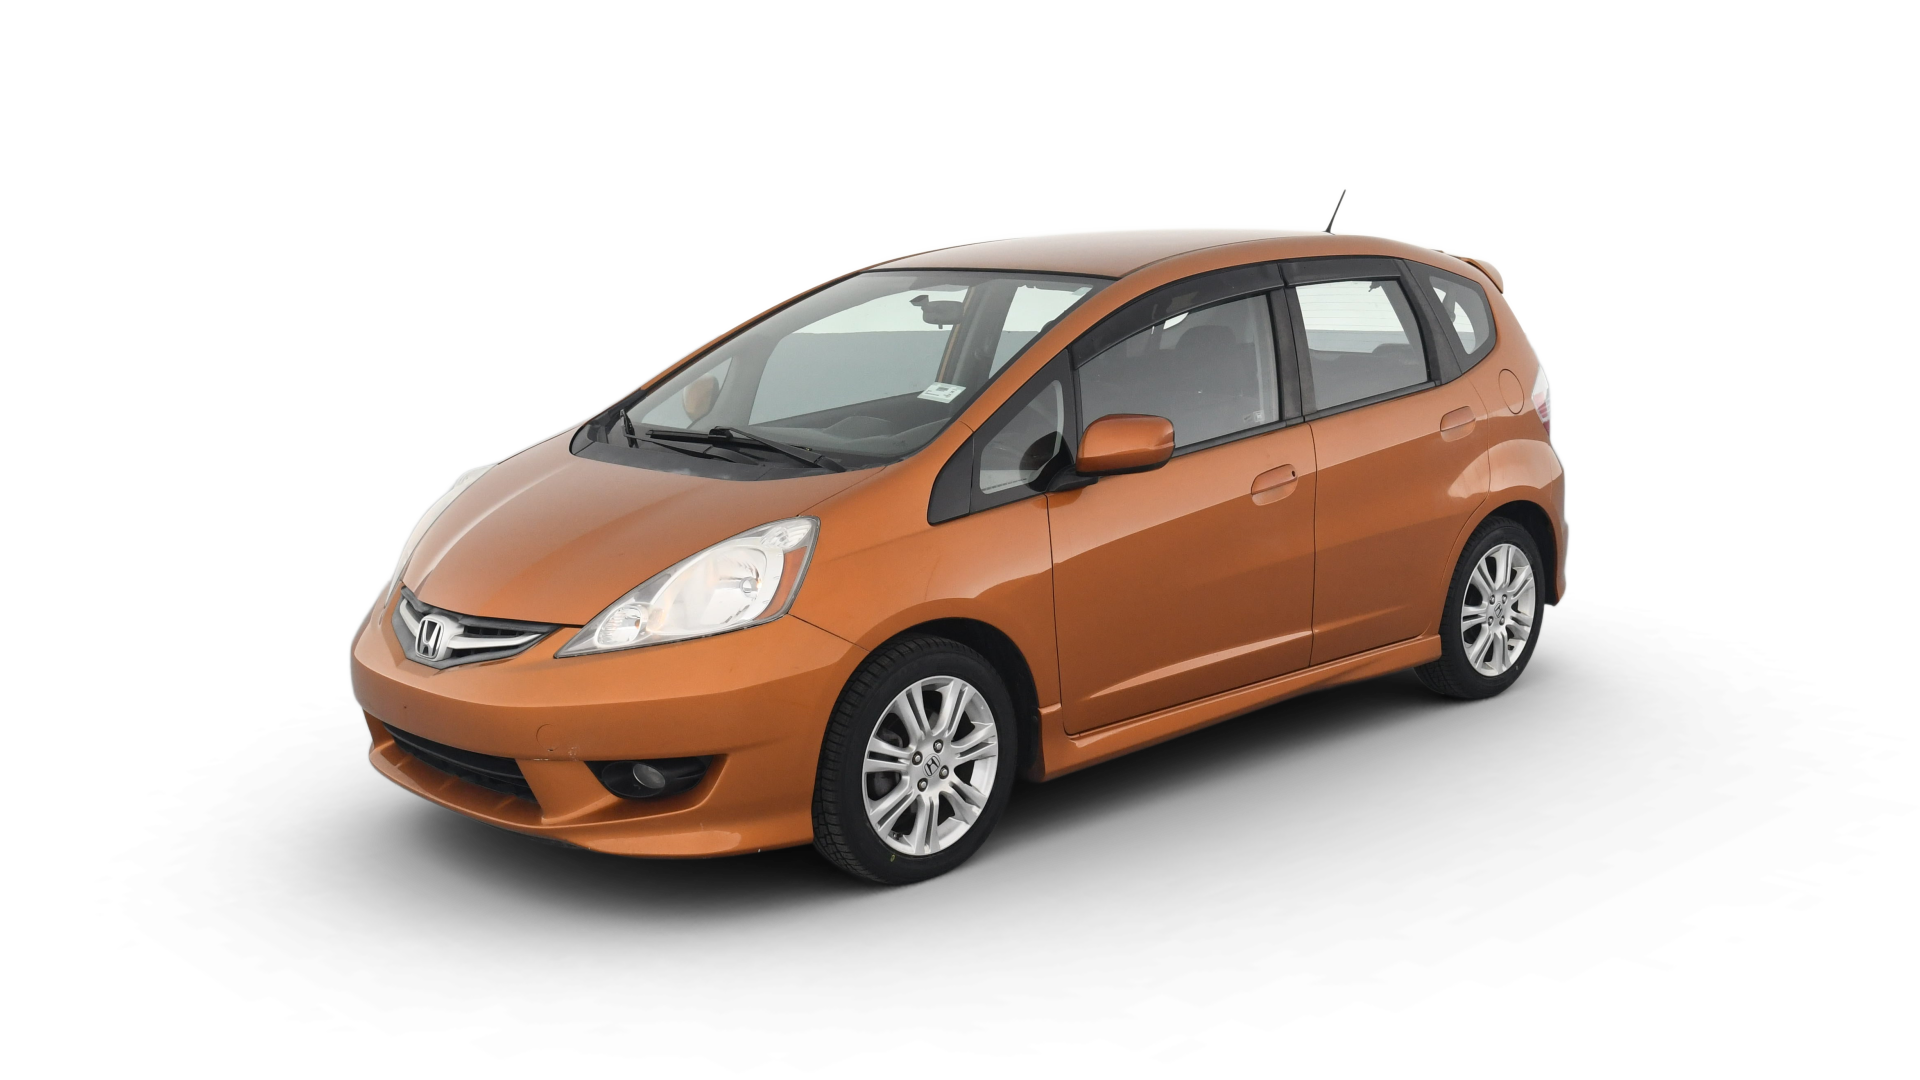 Used Honda Fit For Sale Online | Carvana